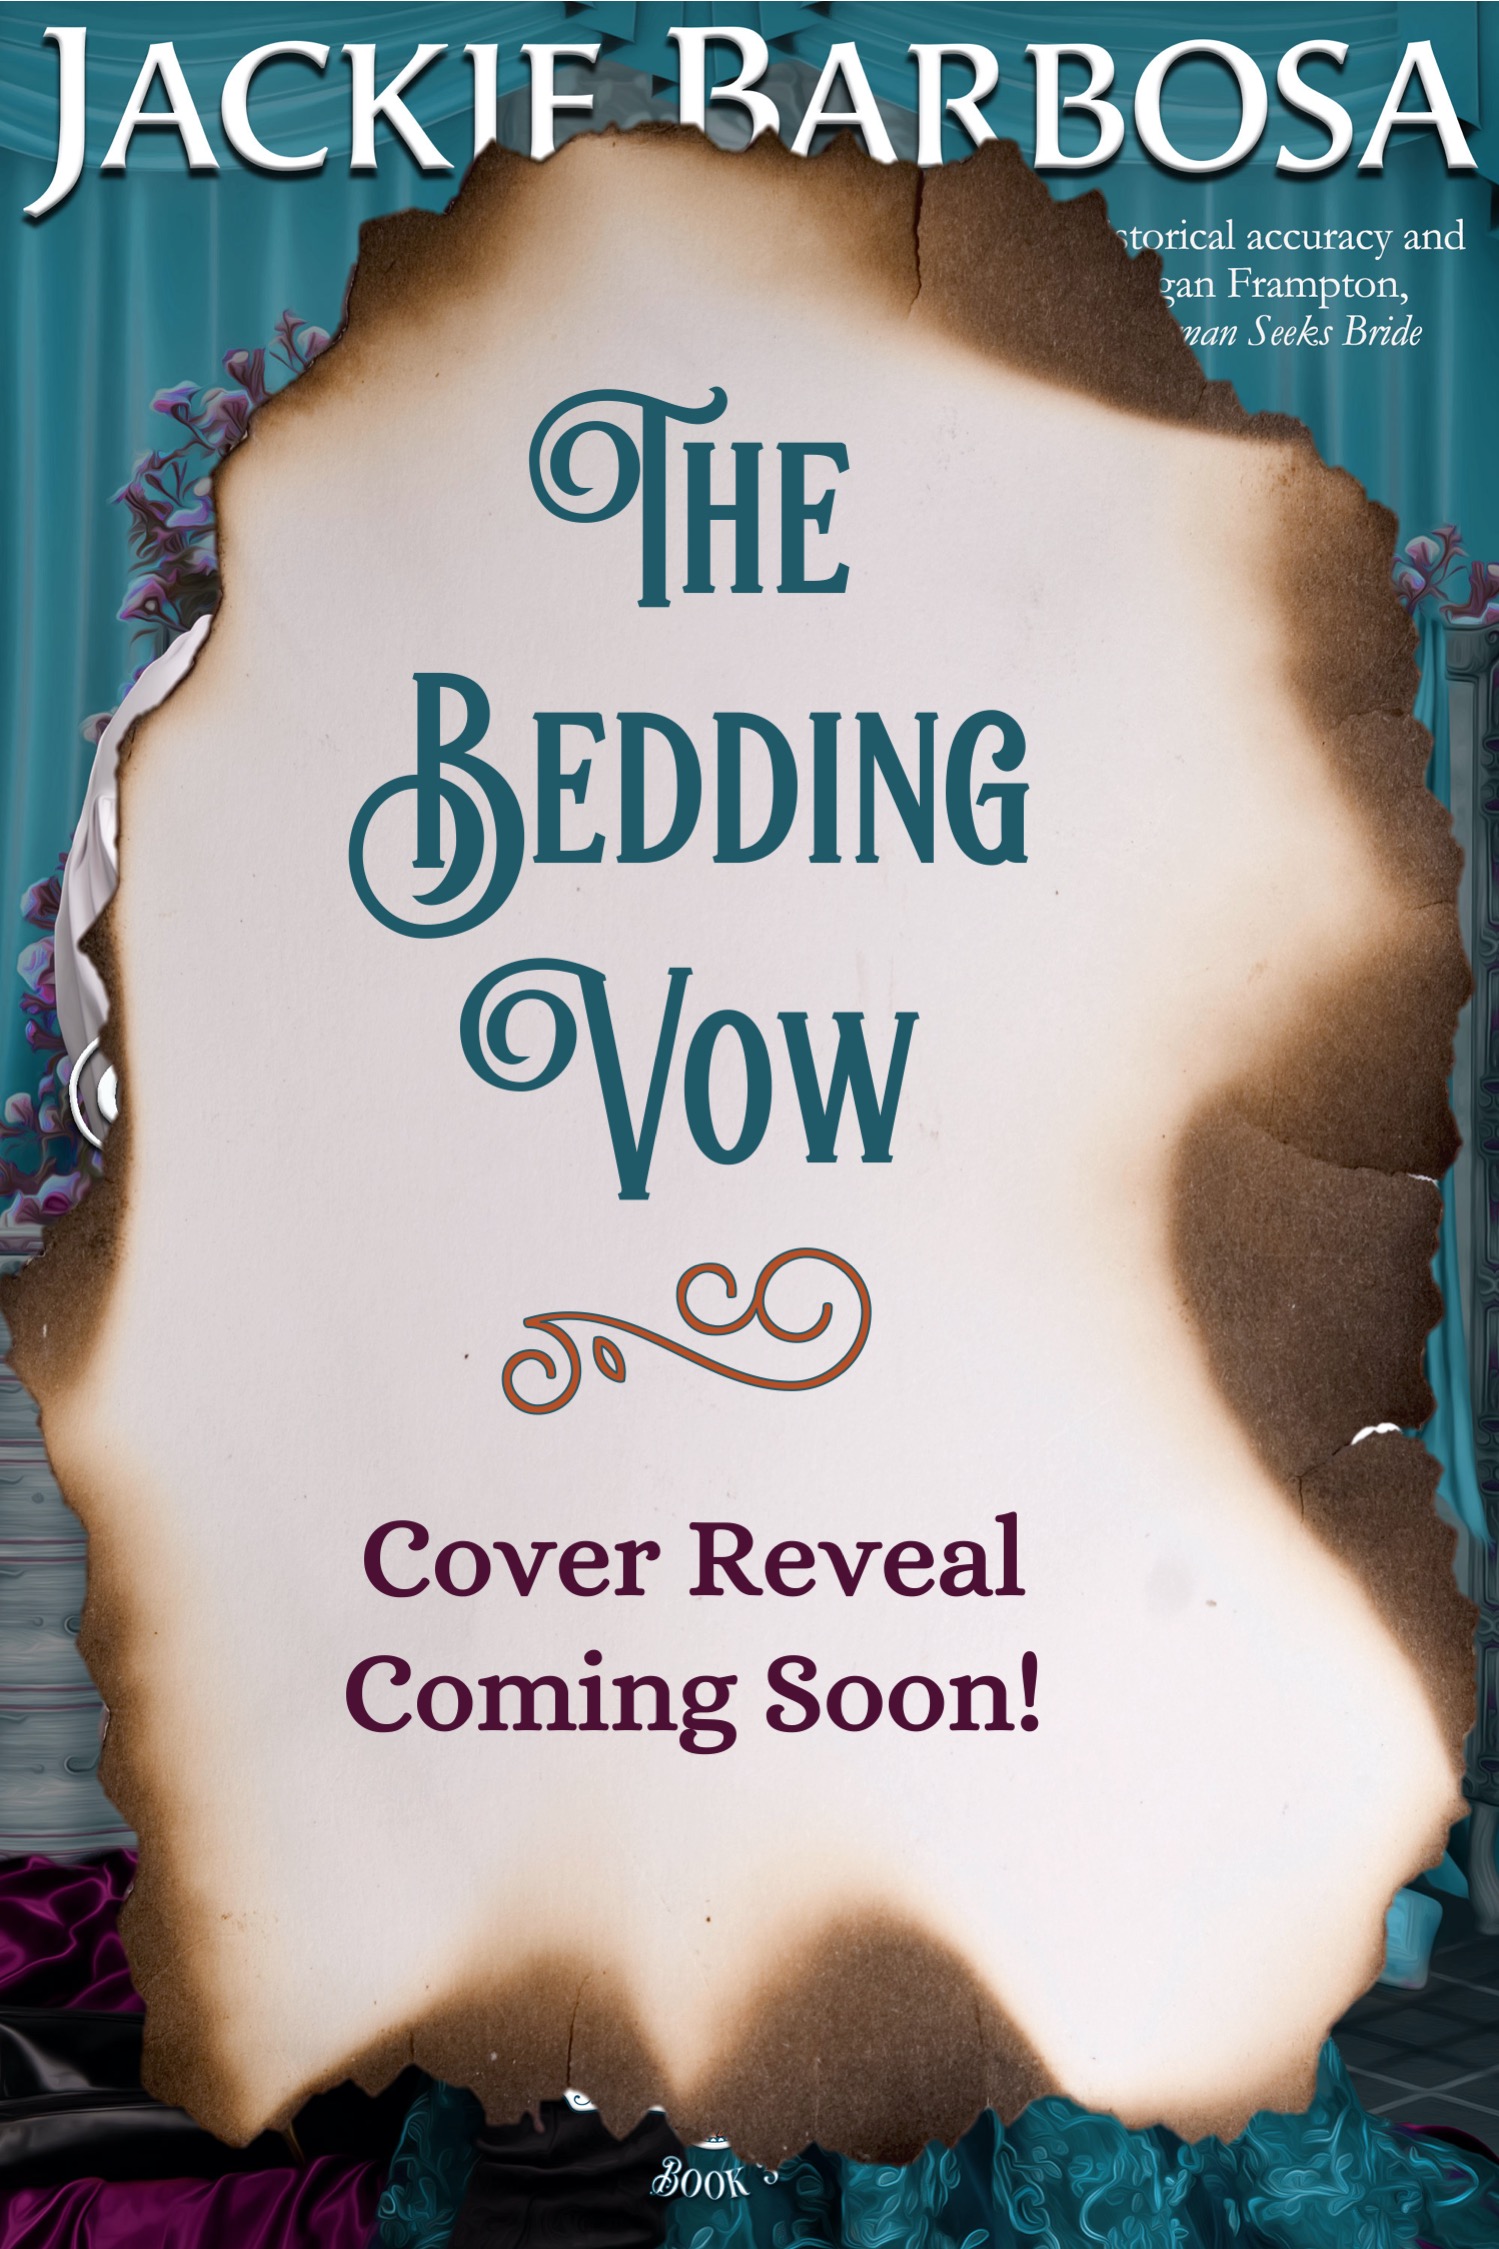 The Bedding Vow by Jackie Barbosa